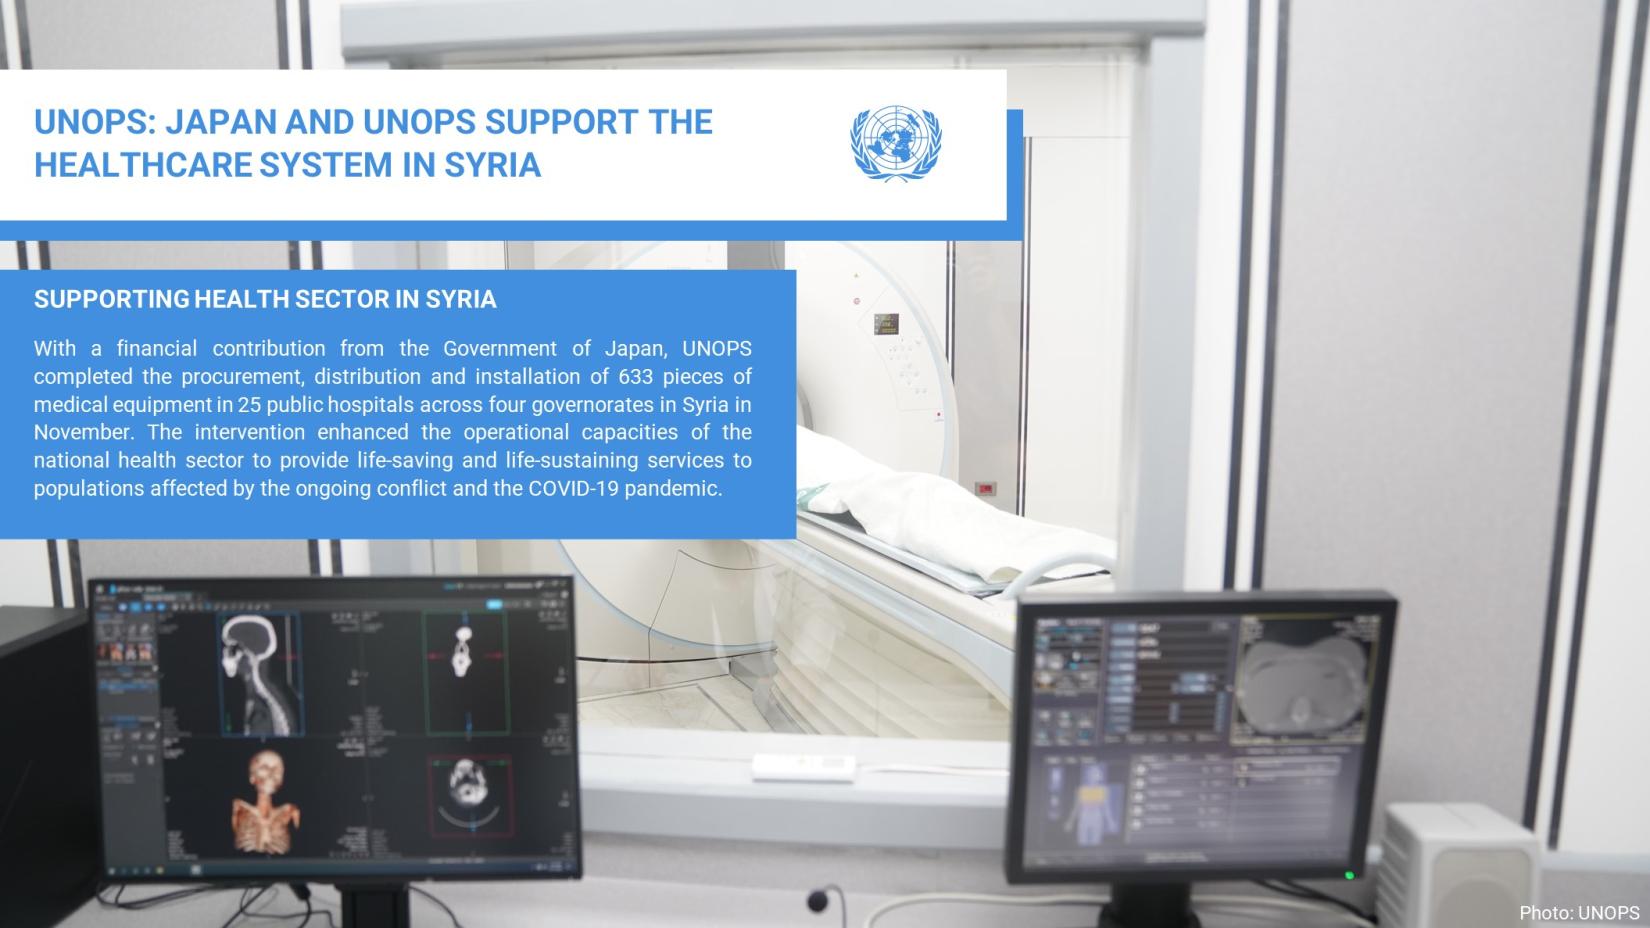 UNOPS JAPAN AND UNOPS SUPPORT THE HEALTH CARE SYSTEM IN SYRIA